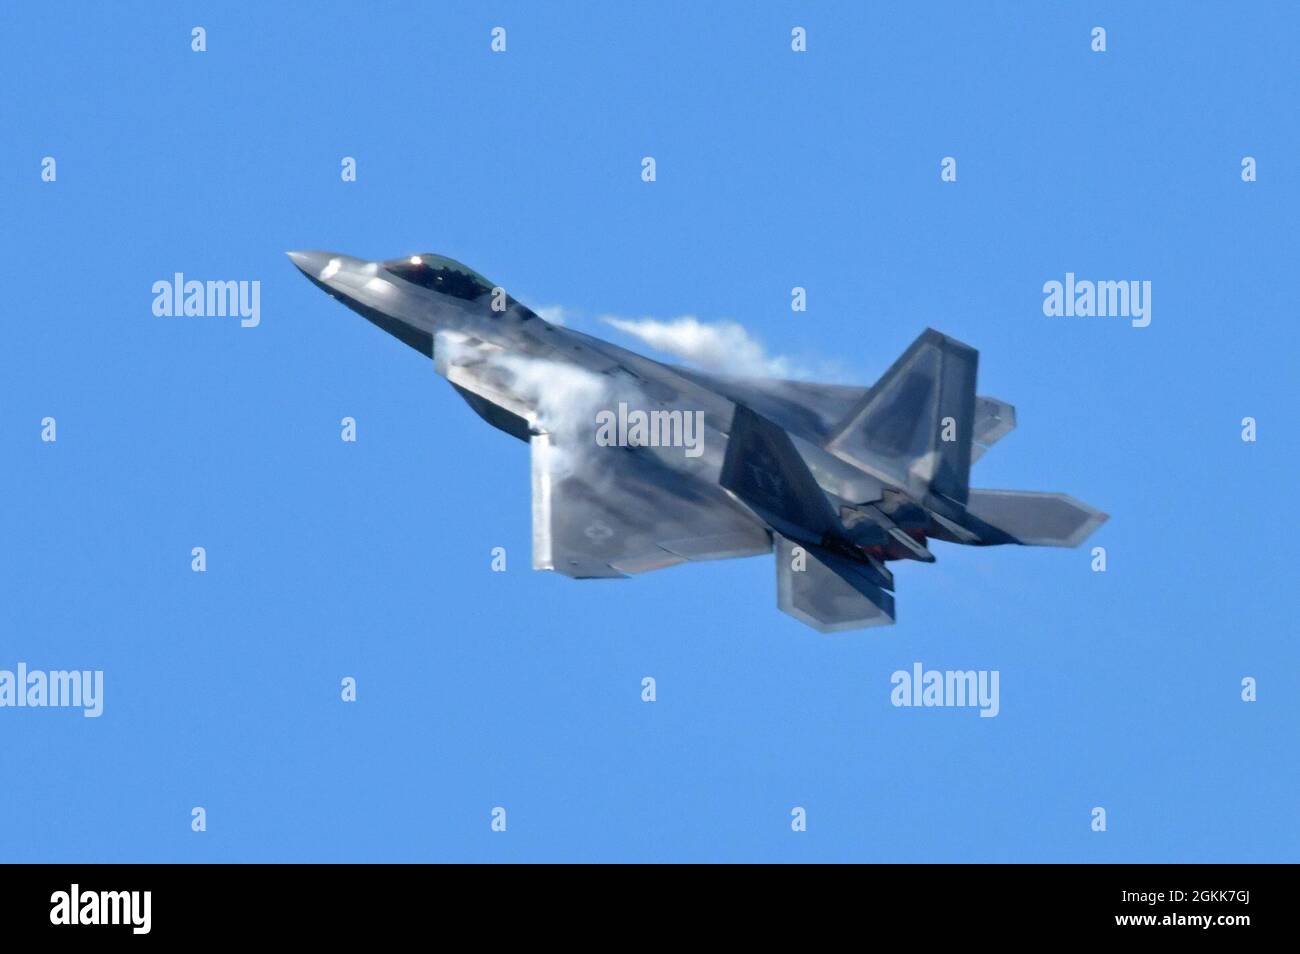 An F-22 Raptor Demonstration Team commander and pilot performs during an air demonstration at Maxwell Air Force Base, Alabama May 13, 2021.The F-22 possesses a sophisticated sensor suite allowing the pilot to track, identify, and shoot air-to-air threats before being detected. Stock Photo